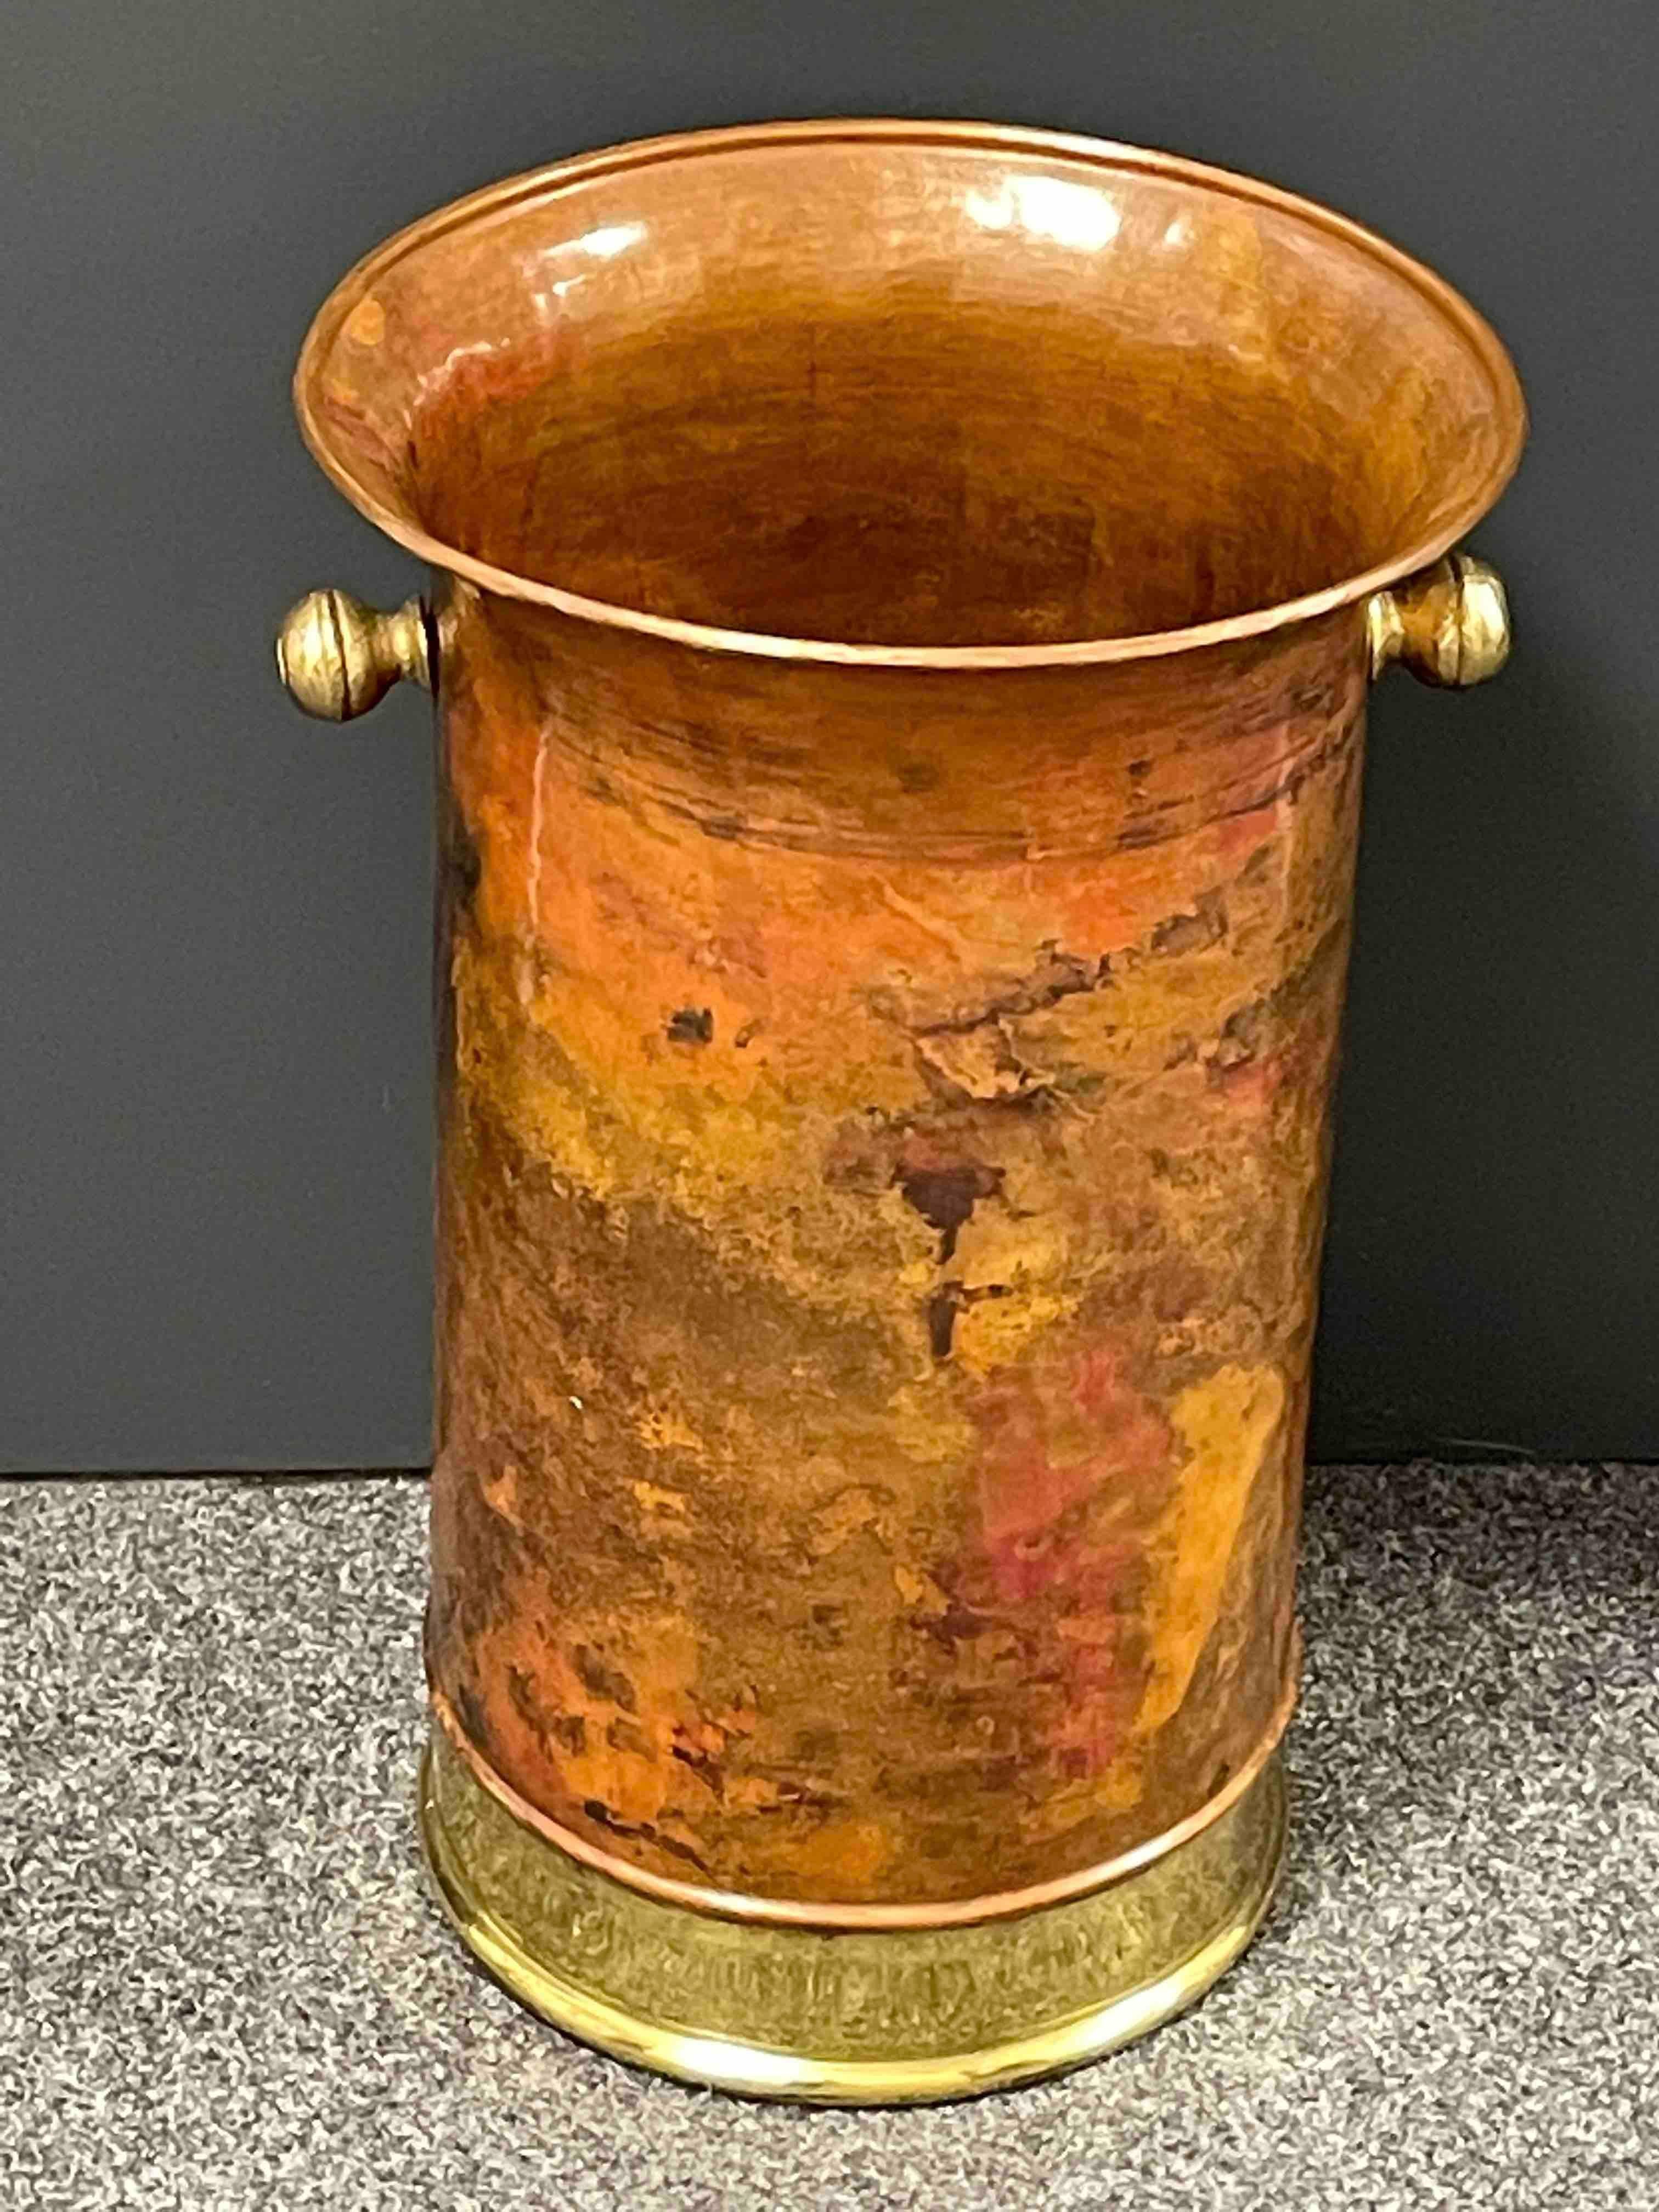 Beautiful Italian Catchall or trash can. Perfect for your office or also to use as an umbrella or walking stick stand. The piece is in good used vintage condition with patina. The patina only adds to its beauty. Found at an estate sale in Nuremberg,